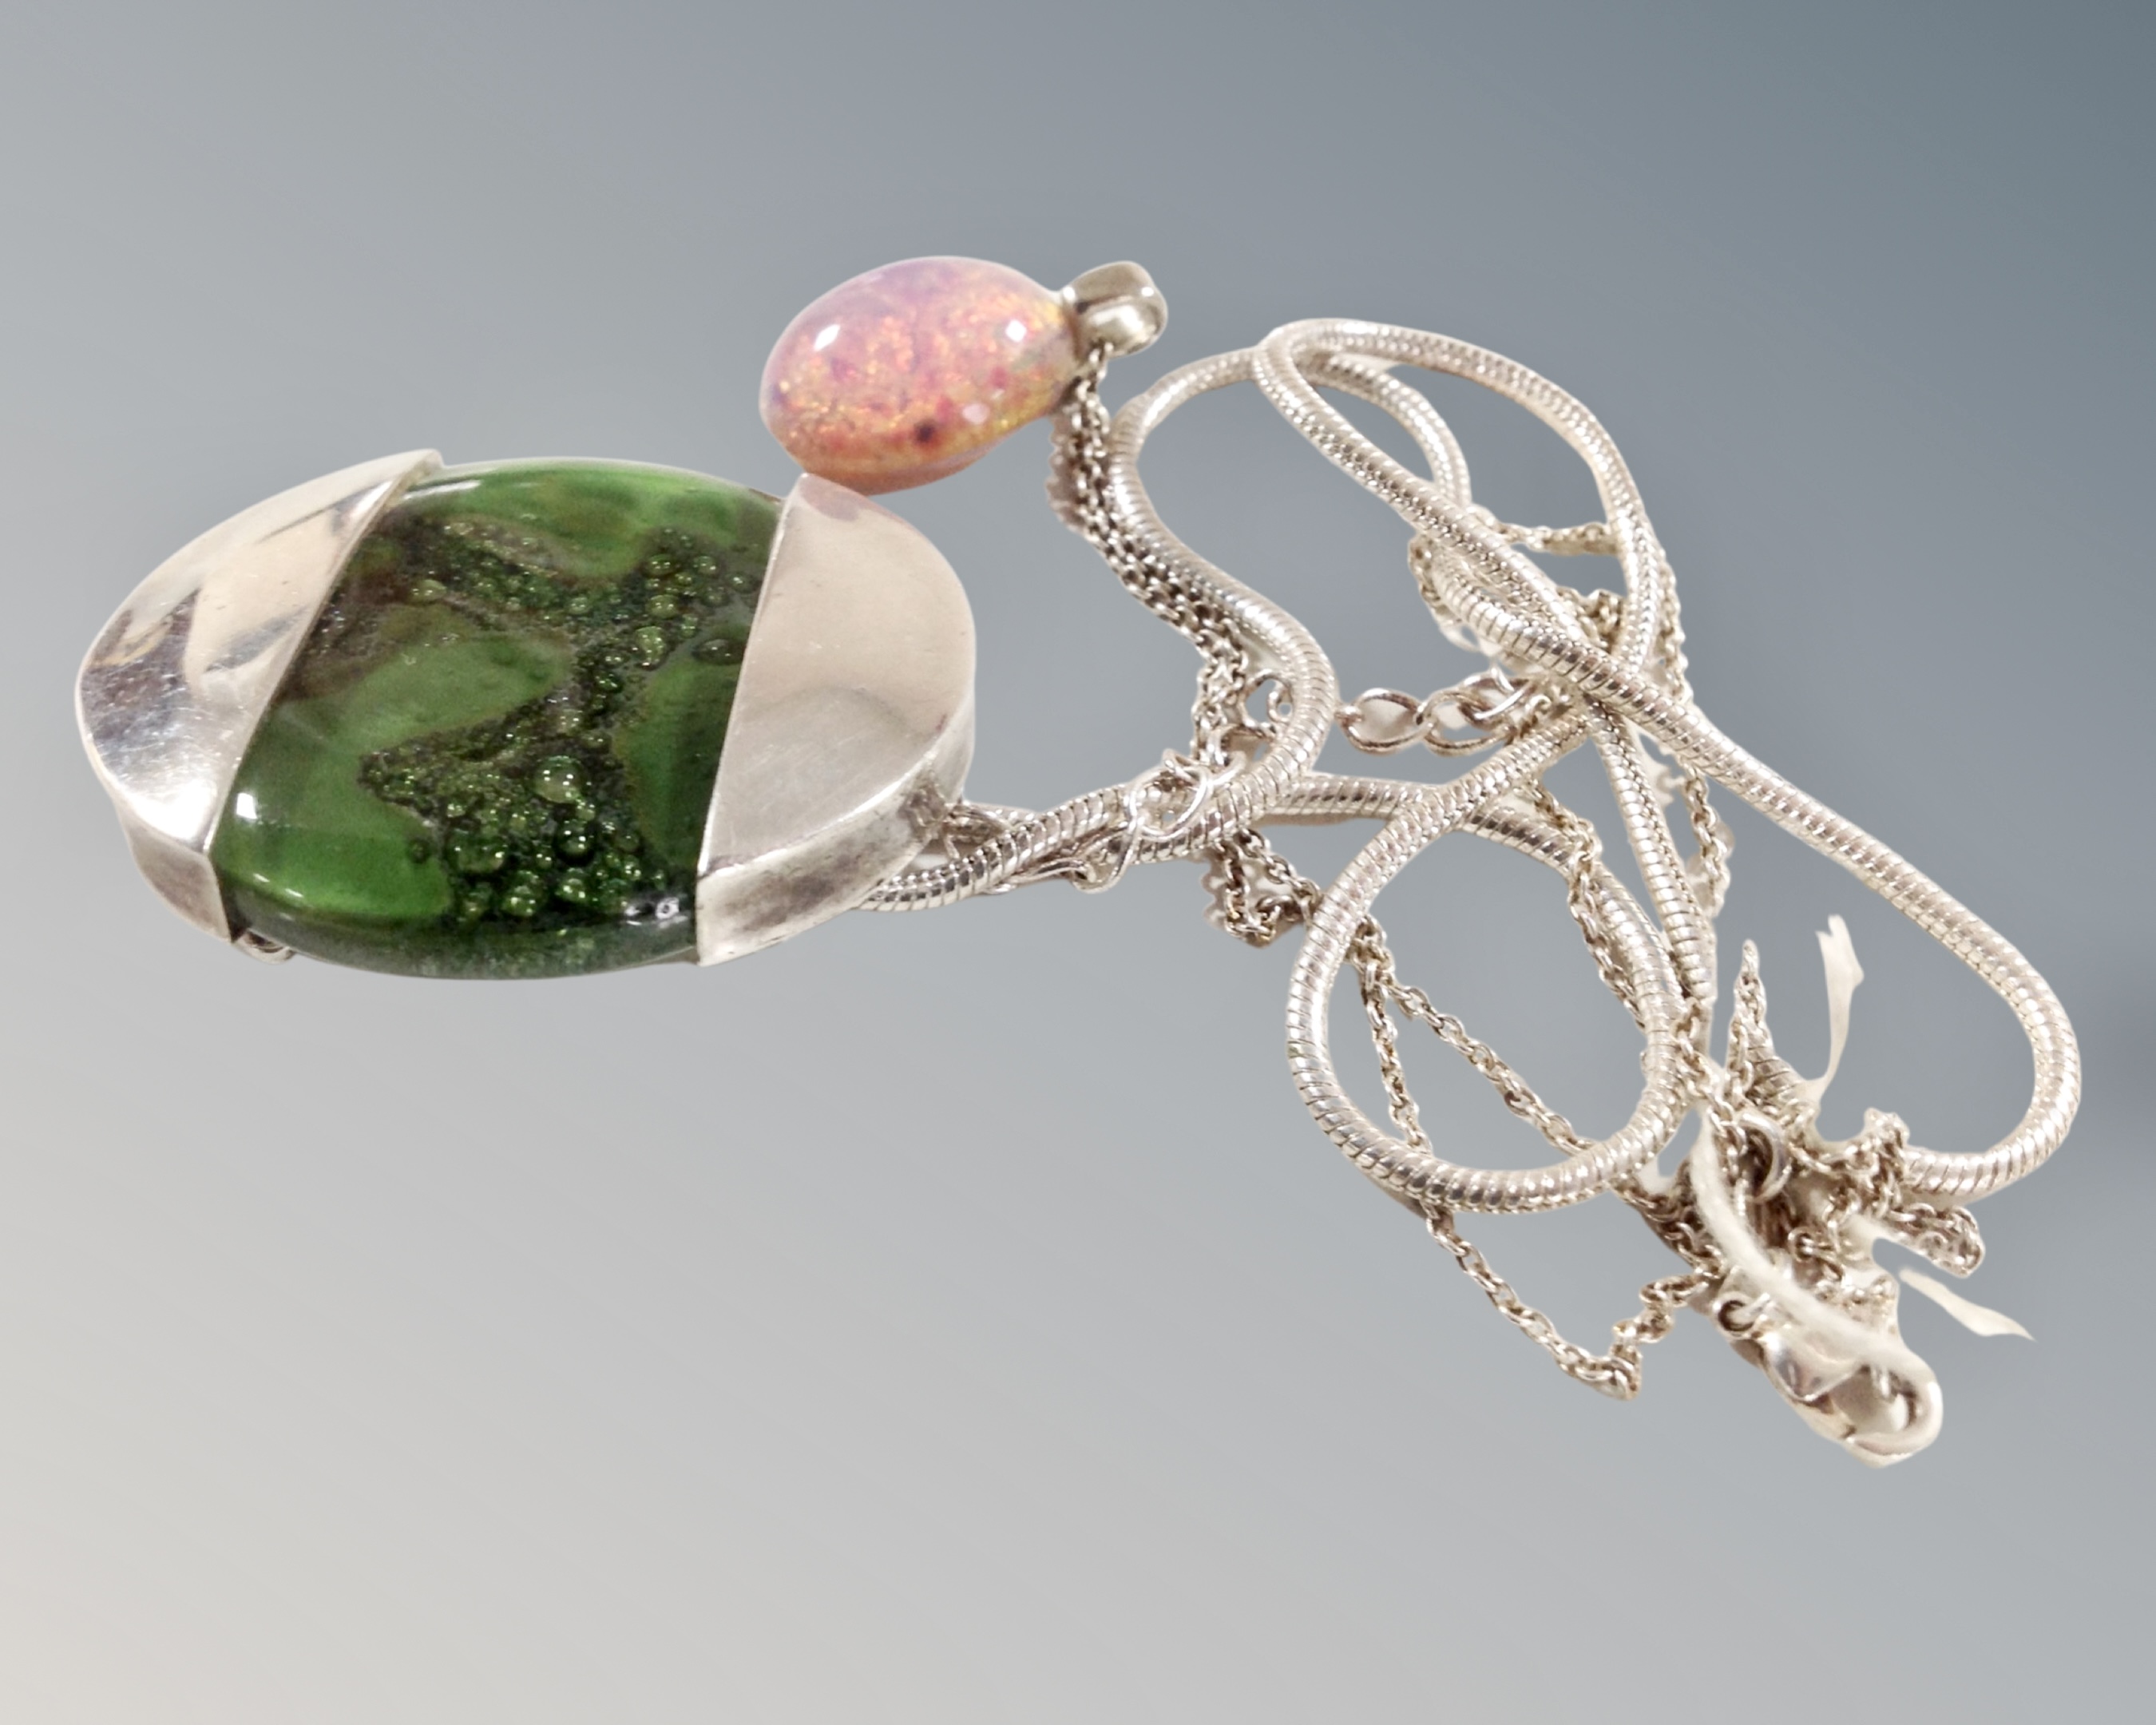 A large green glass and silver pendant on snake chain together with an opal doublet pendant on